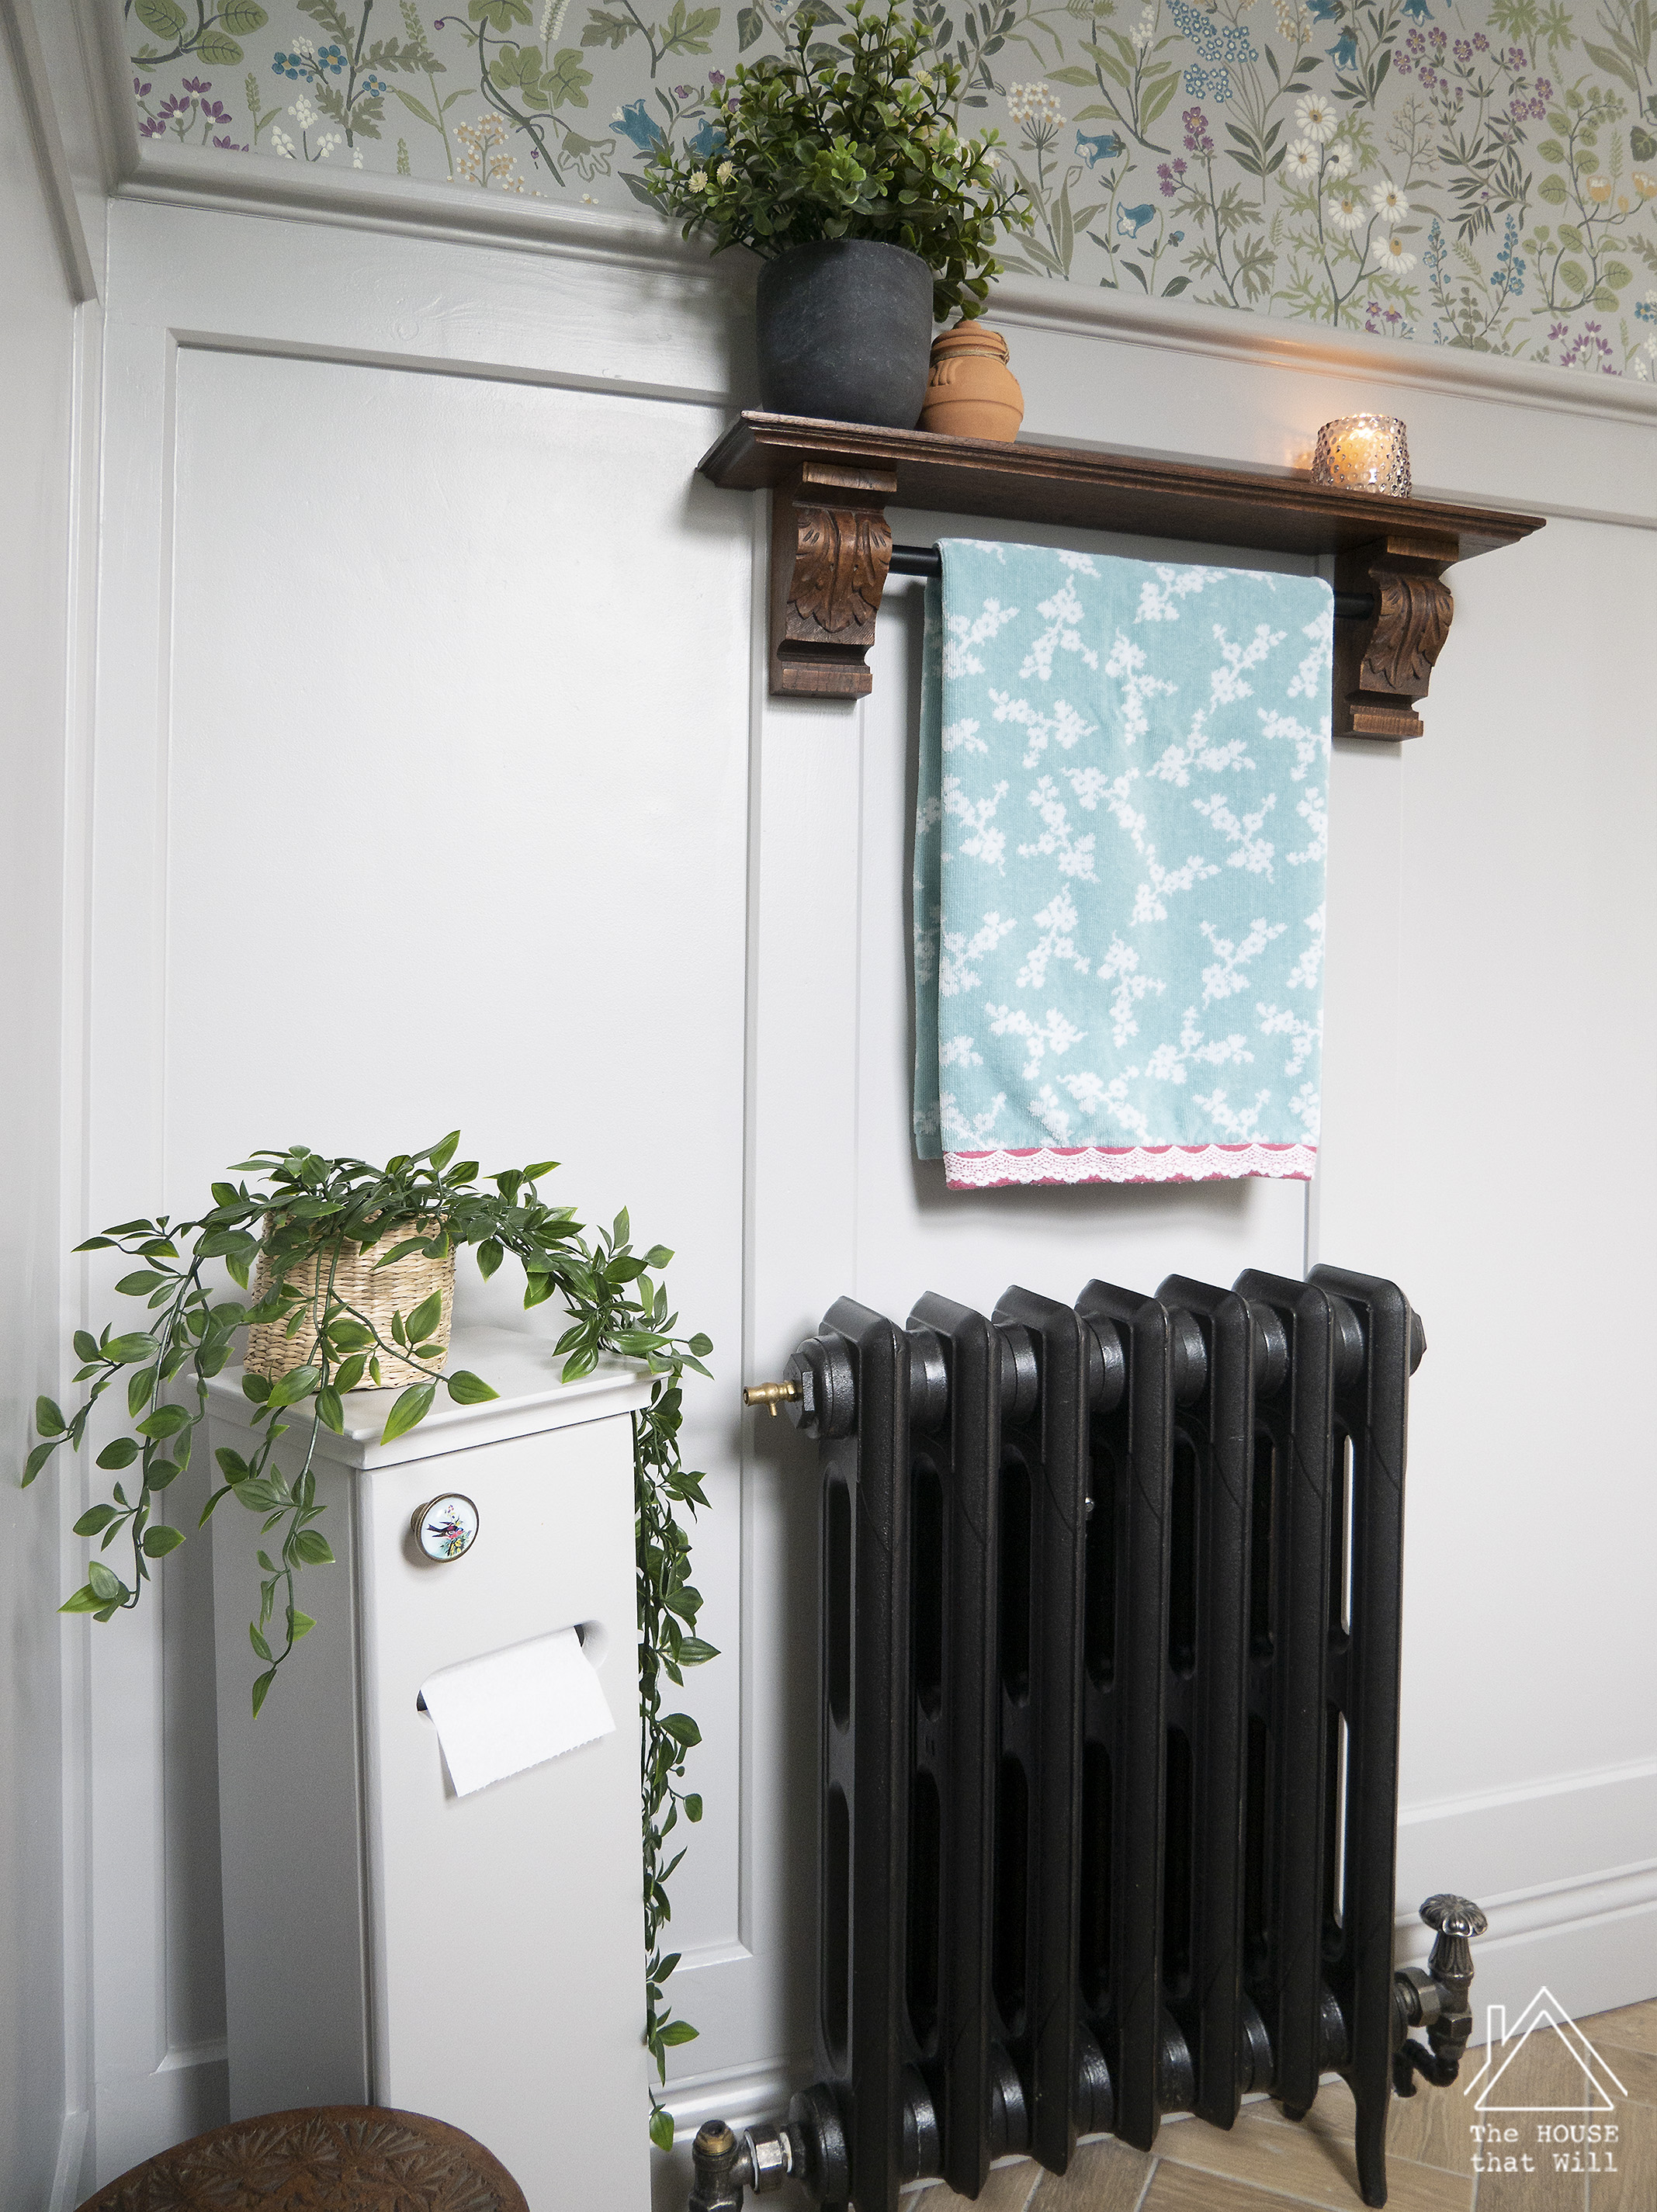 The House that Will | DIY Antique-style Towel Rail